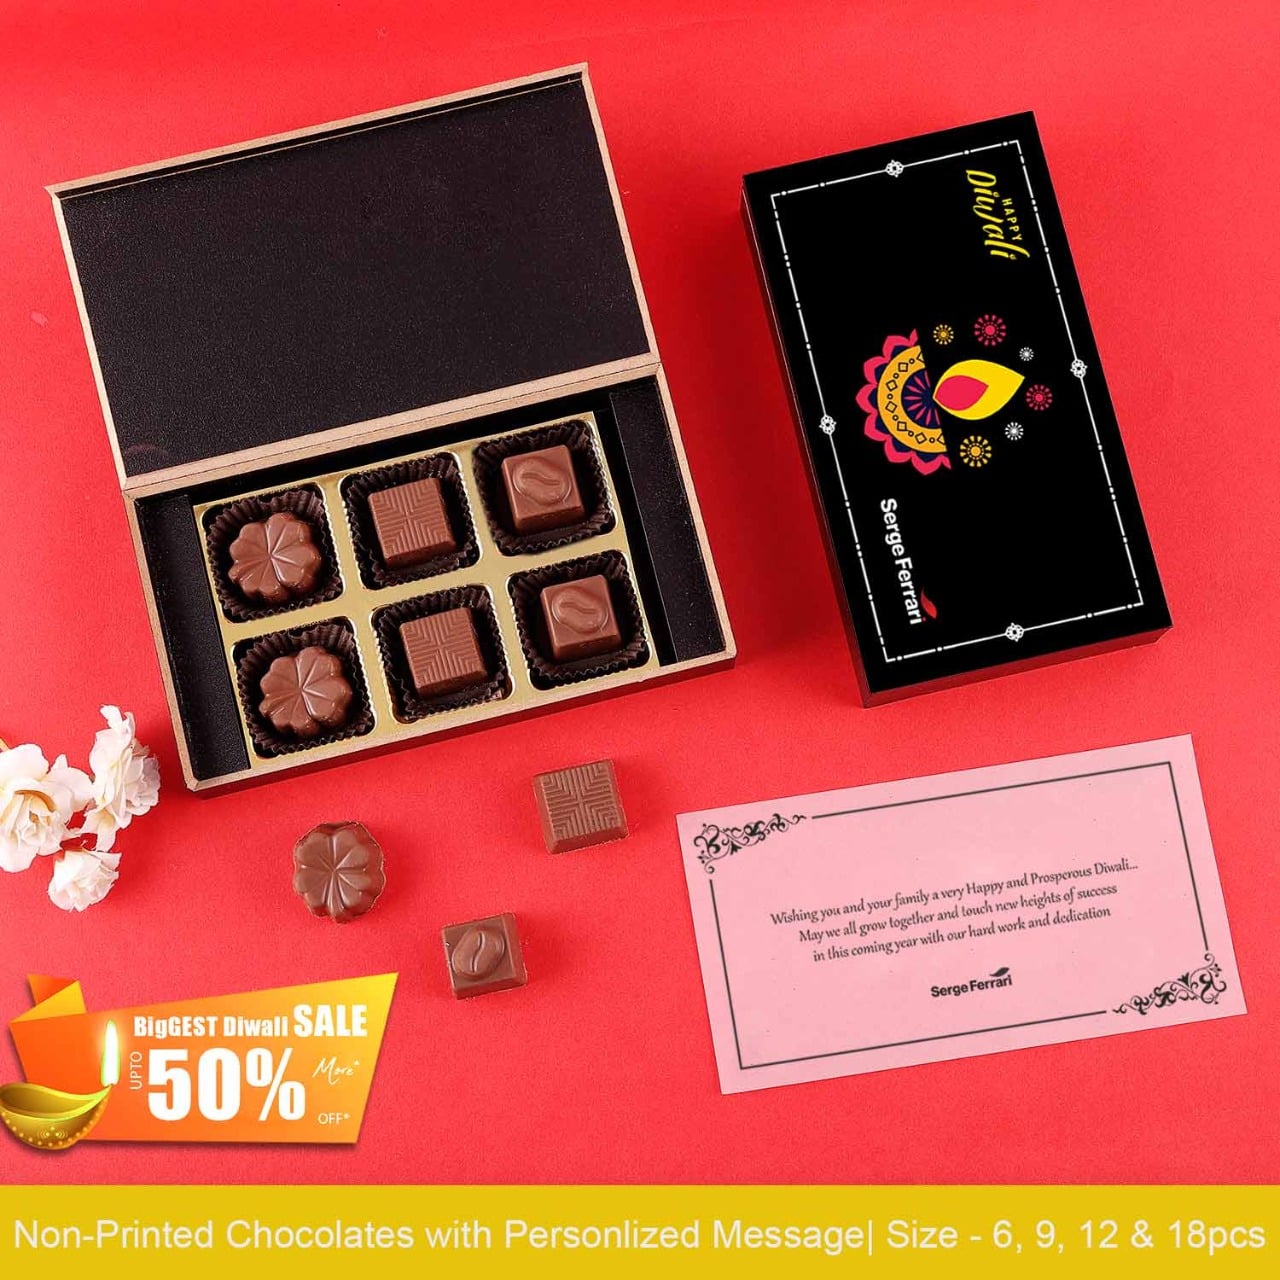 Best Personalized Diwali Premium Corporate Gifts